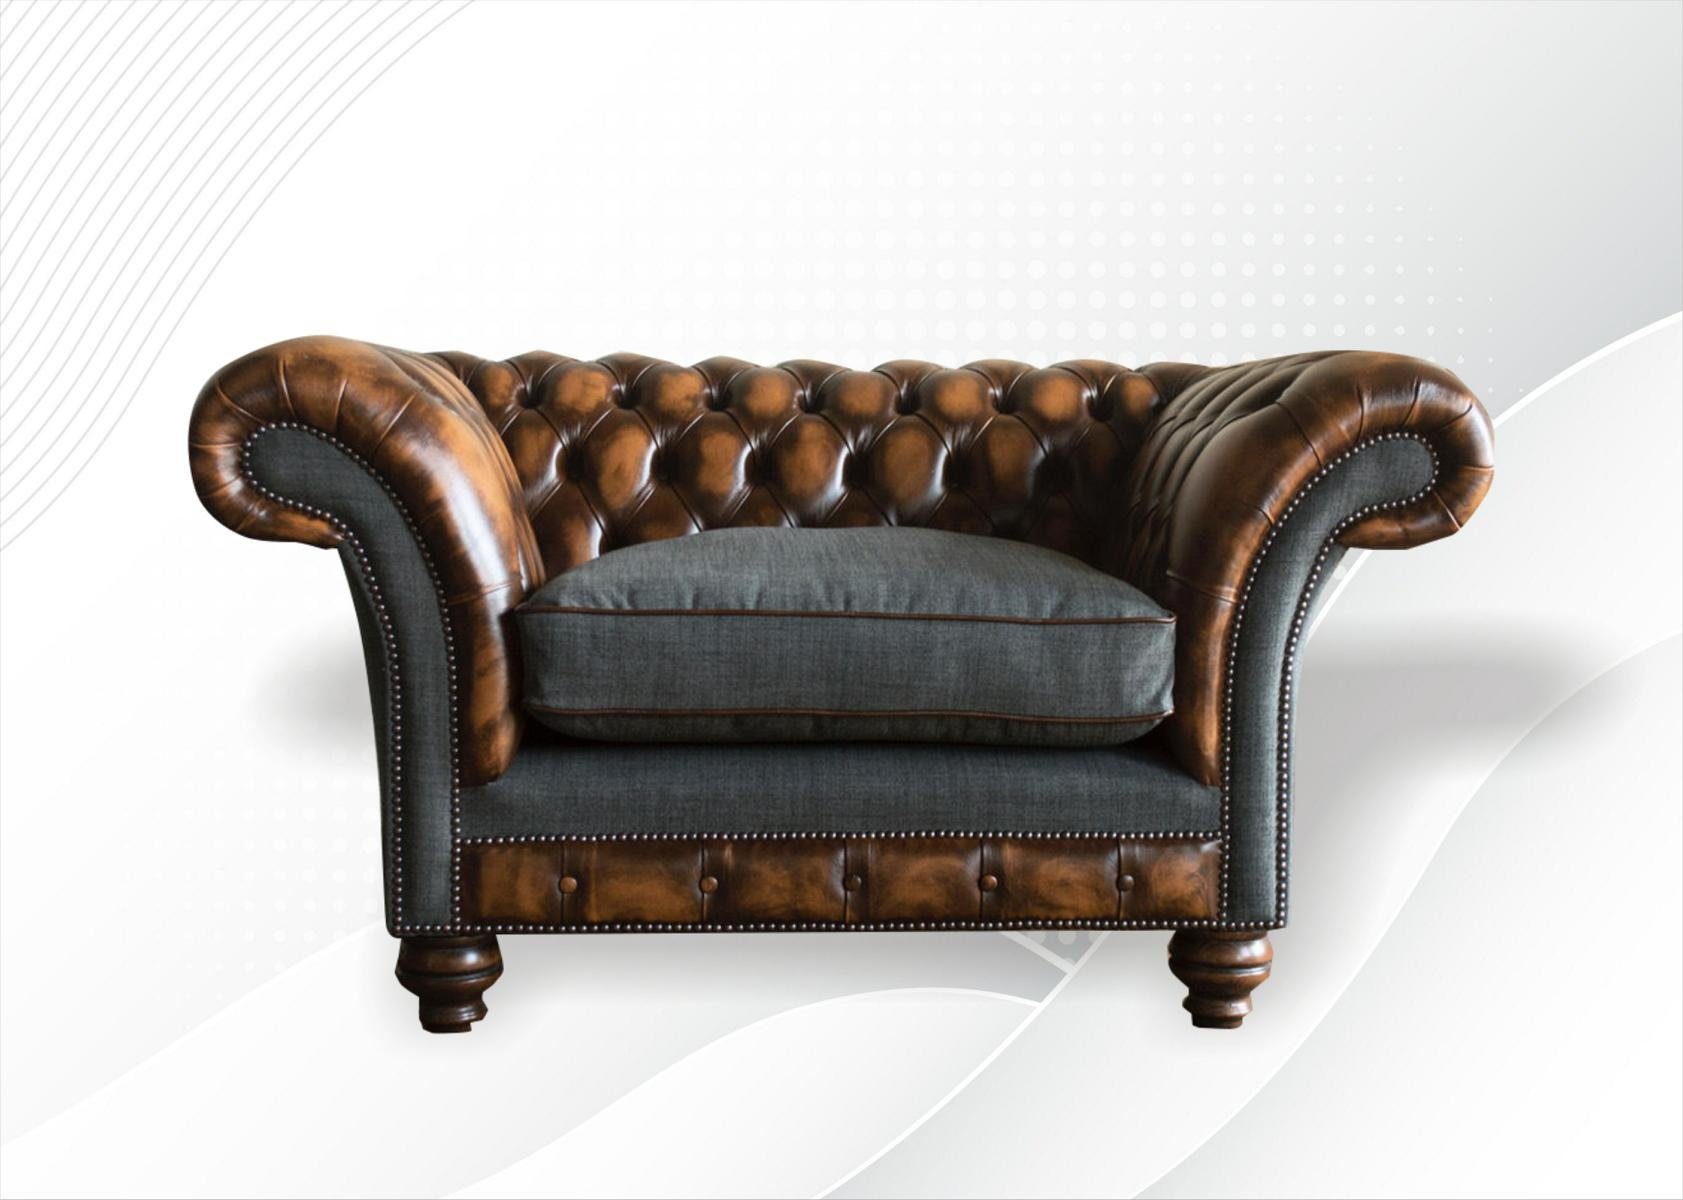 JVmoebel Chesterfield-Sessel, Sessel Couch Polster Sofa Textil Chesterfield Couchen 1 Sitzer